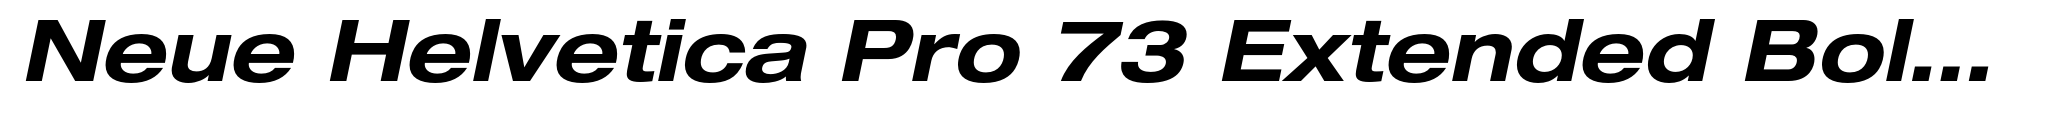 Neue Helvetica Pro 73 Extended Bold Oblique image